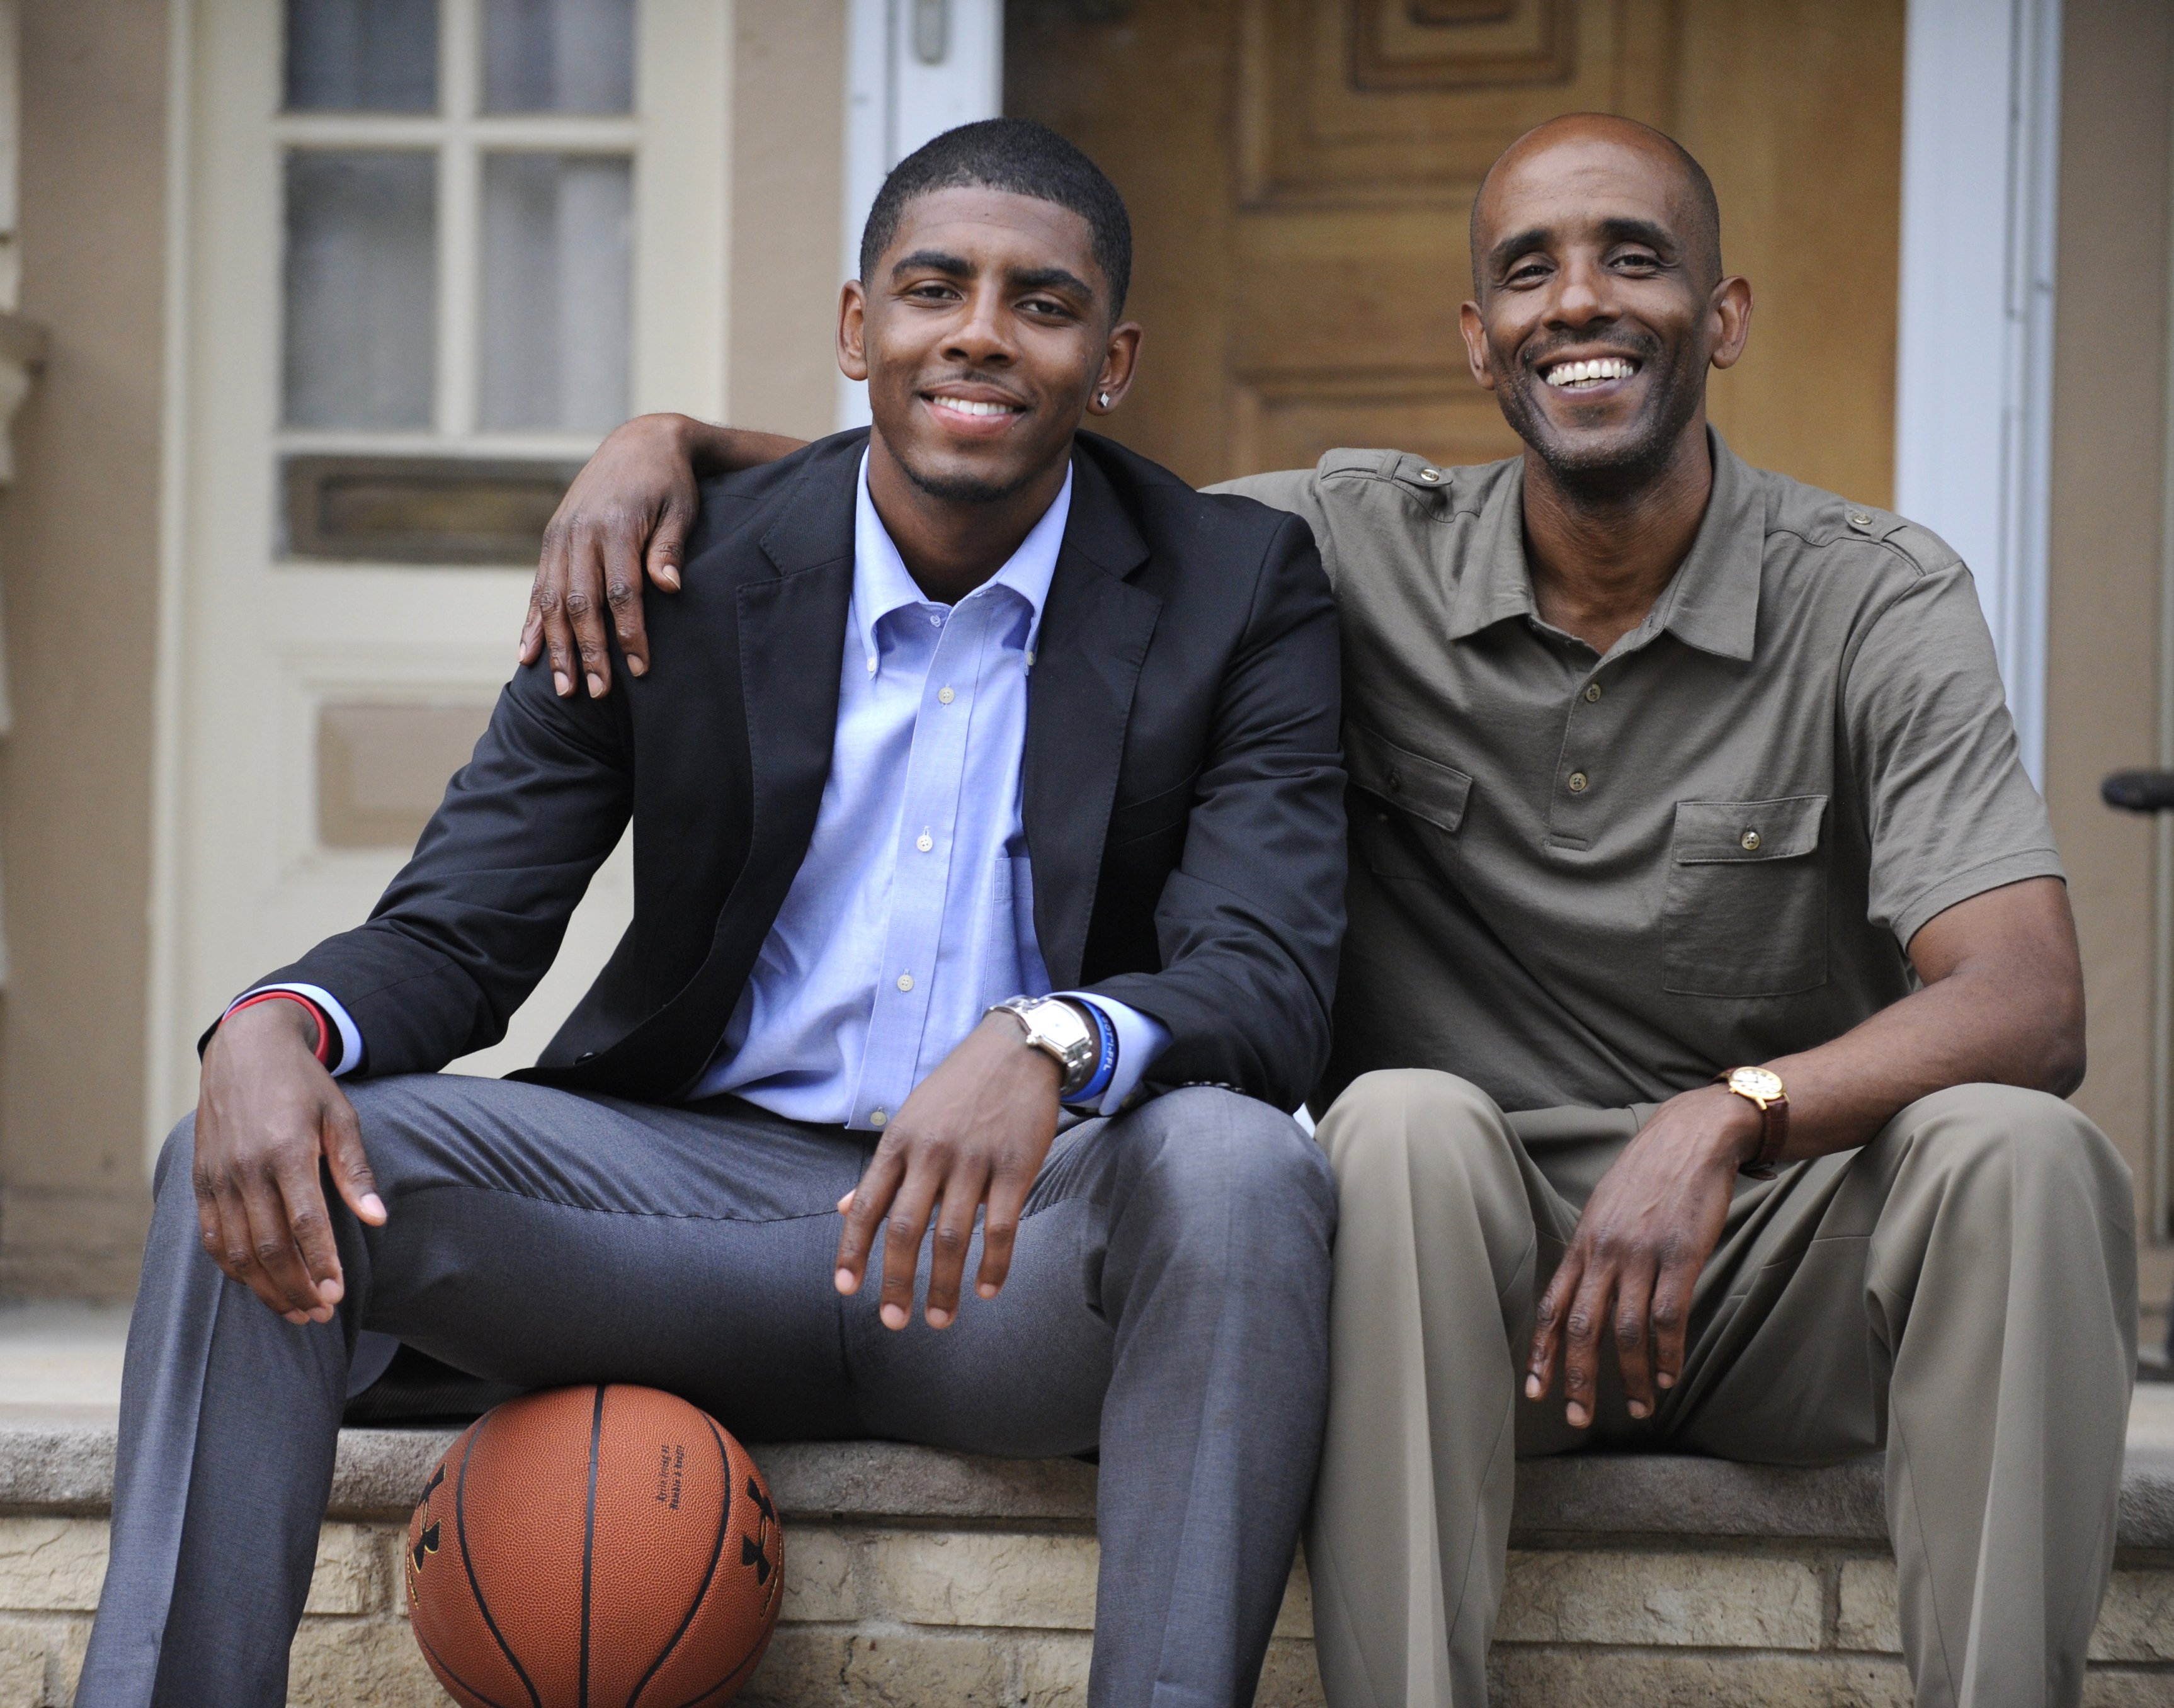 Kyrie Irving poses with his father, Drederick Irving, on June 16, 2011, in West Orange, New Jersey. | Source: Getty Images